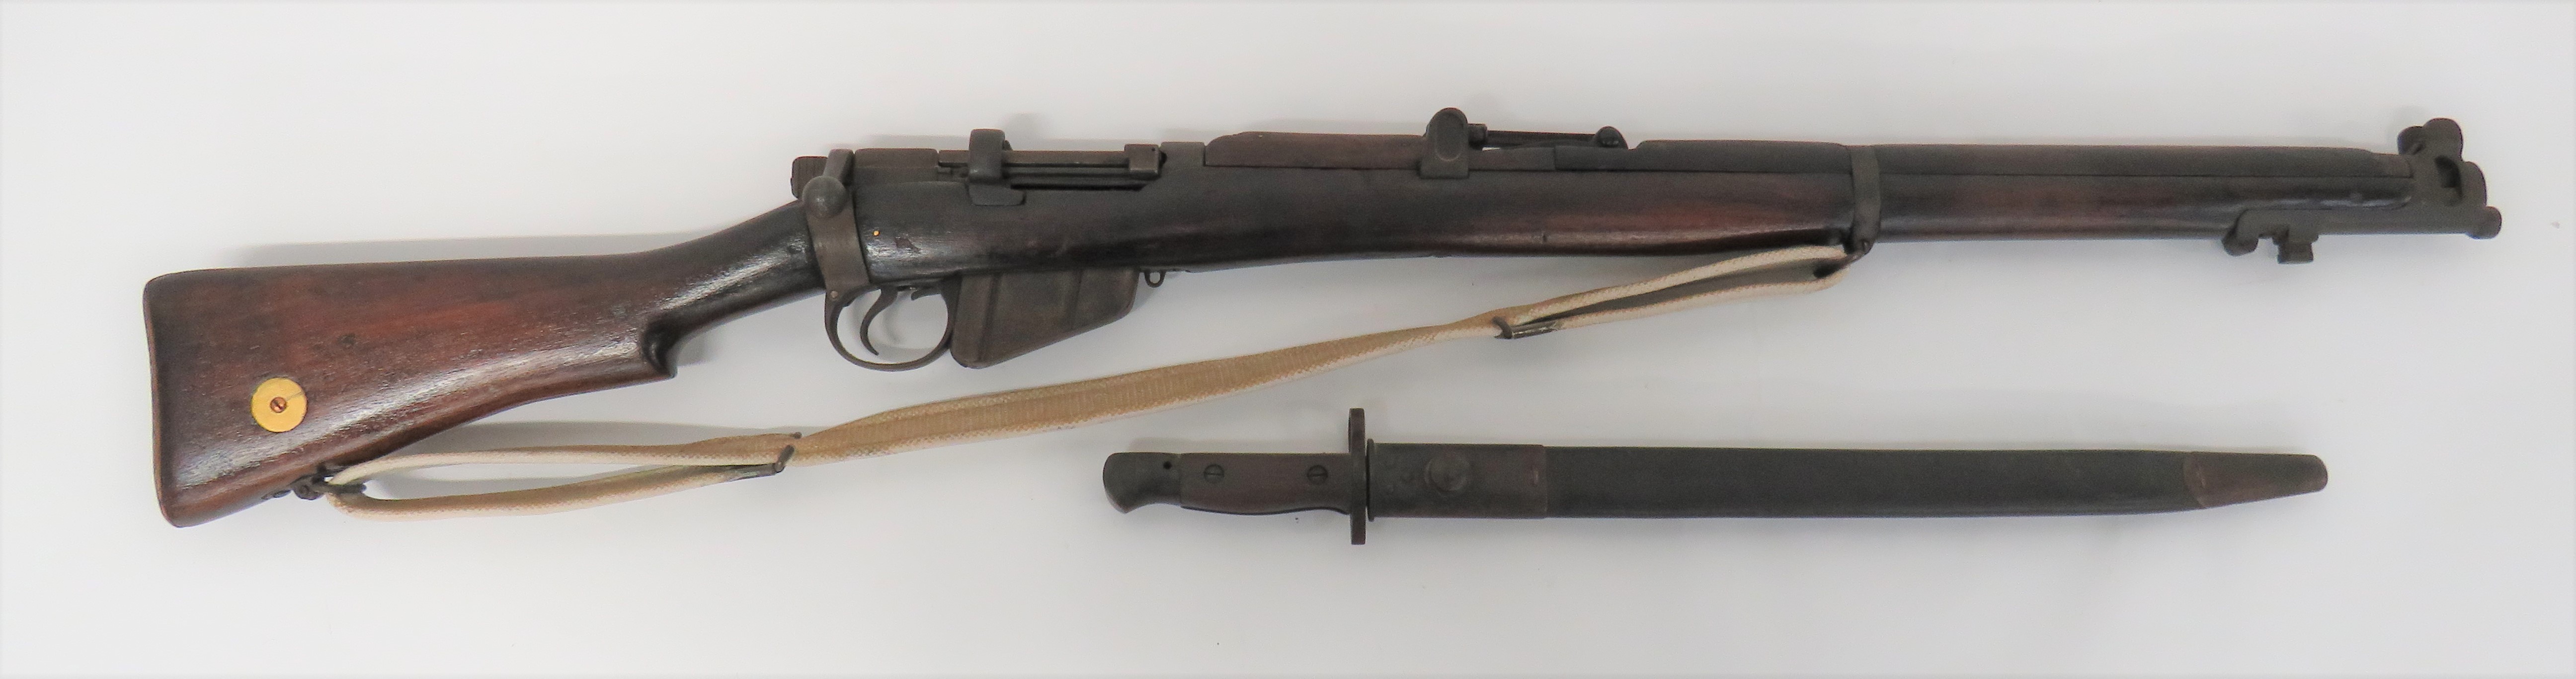 Deactivated 1916 Dated SMLE MKIII Rifle .303, 25 1/4 inch barrel.  Top mounted leaf sight.  Action